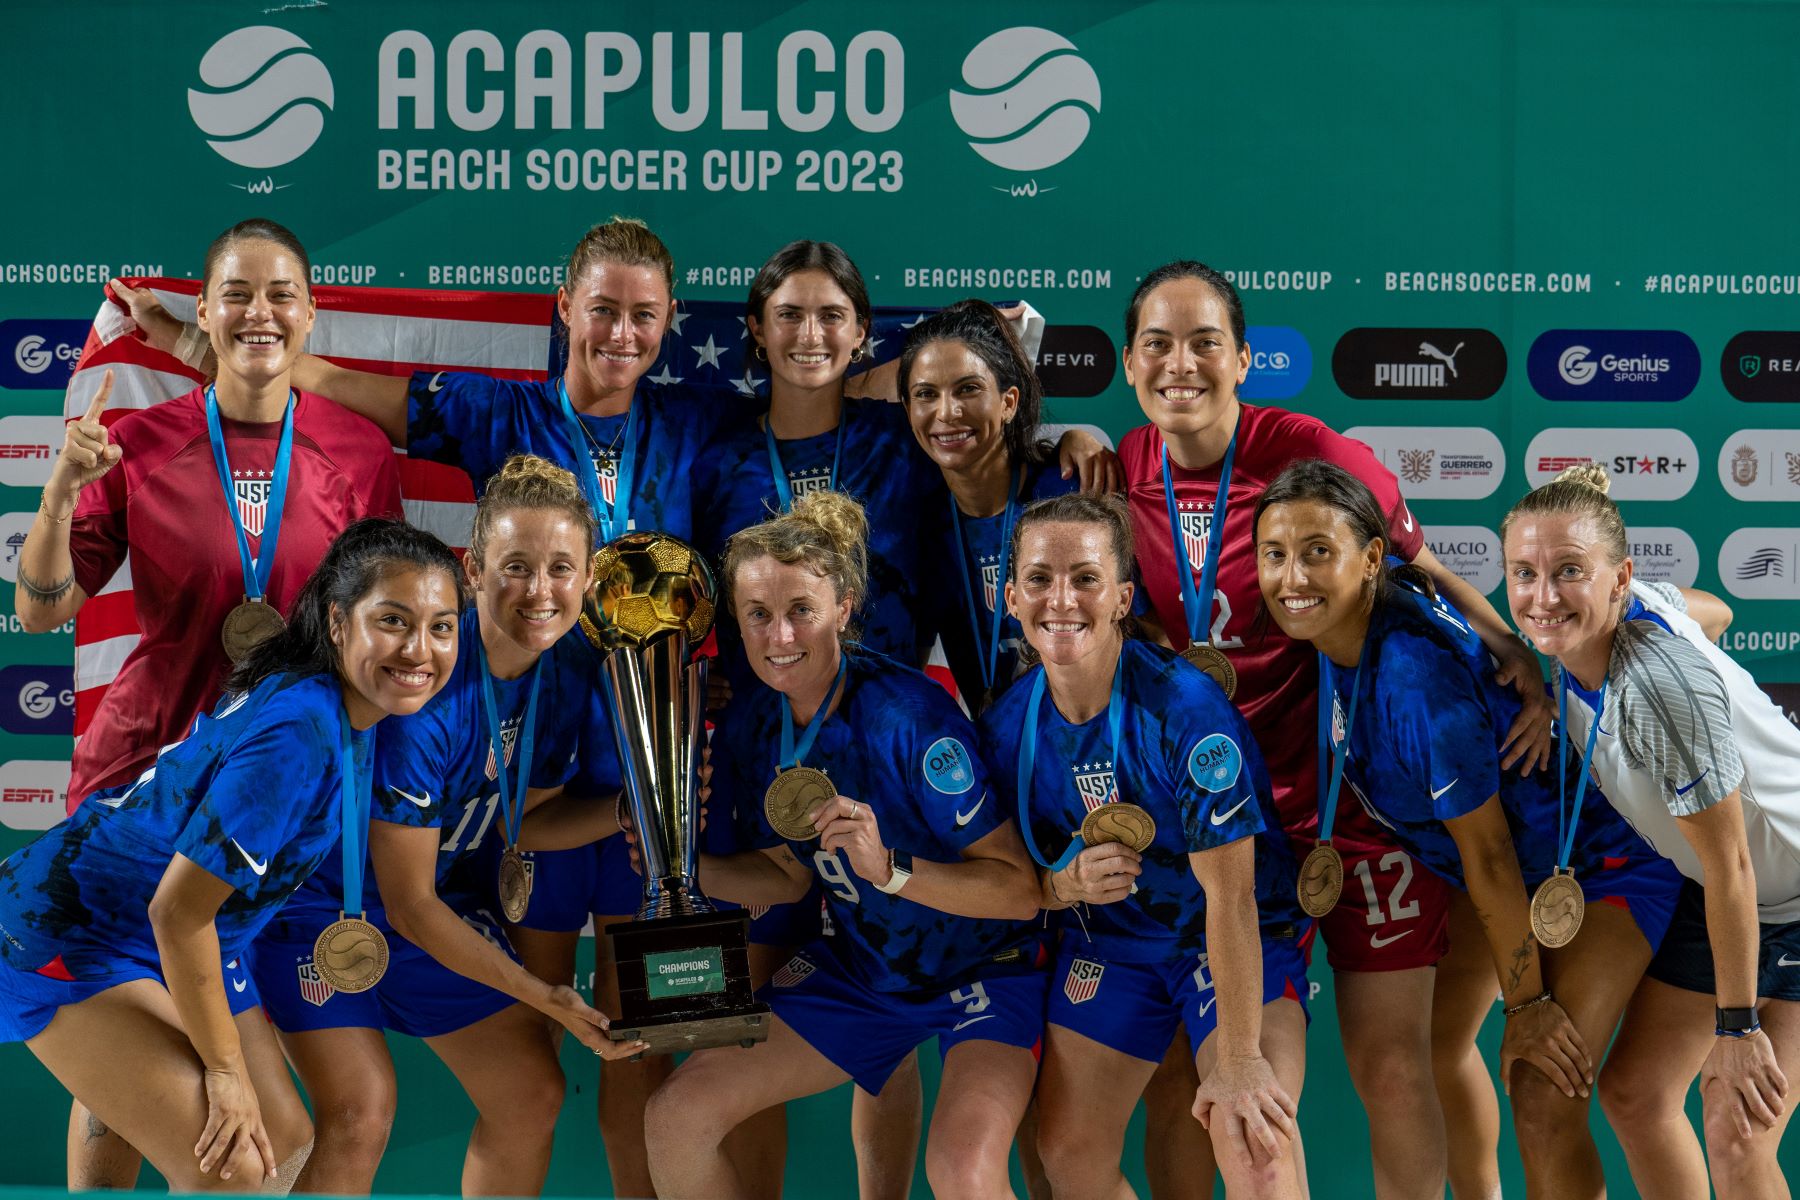 U.S. Beach Soccer Women’s National Team Wins Acapulco Cup With Three